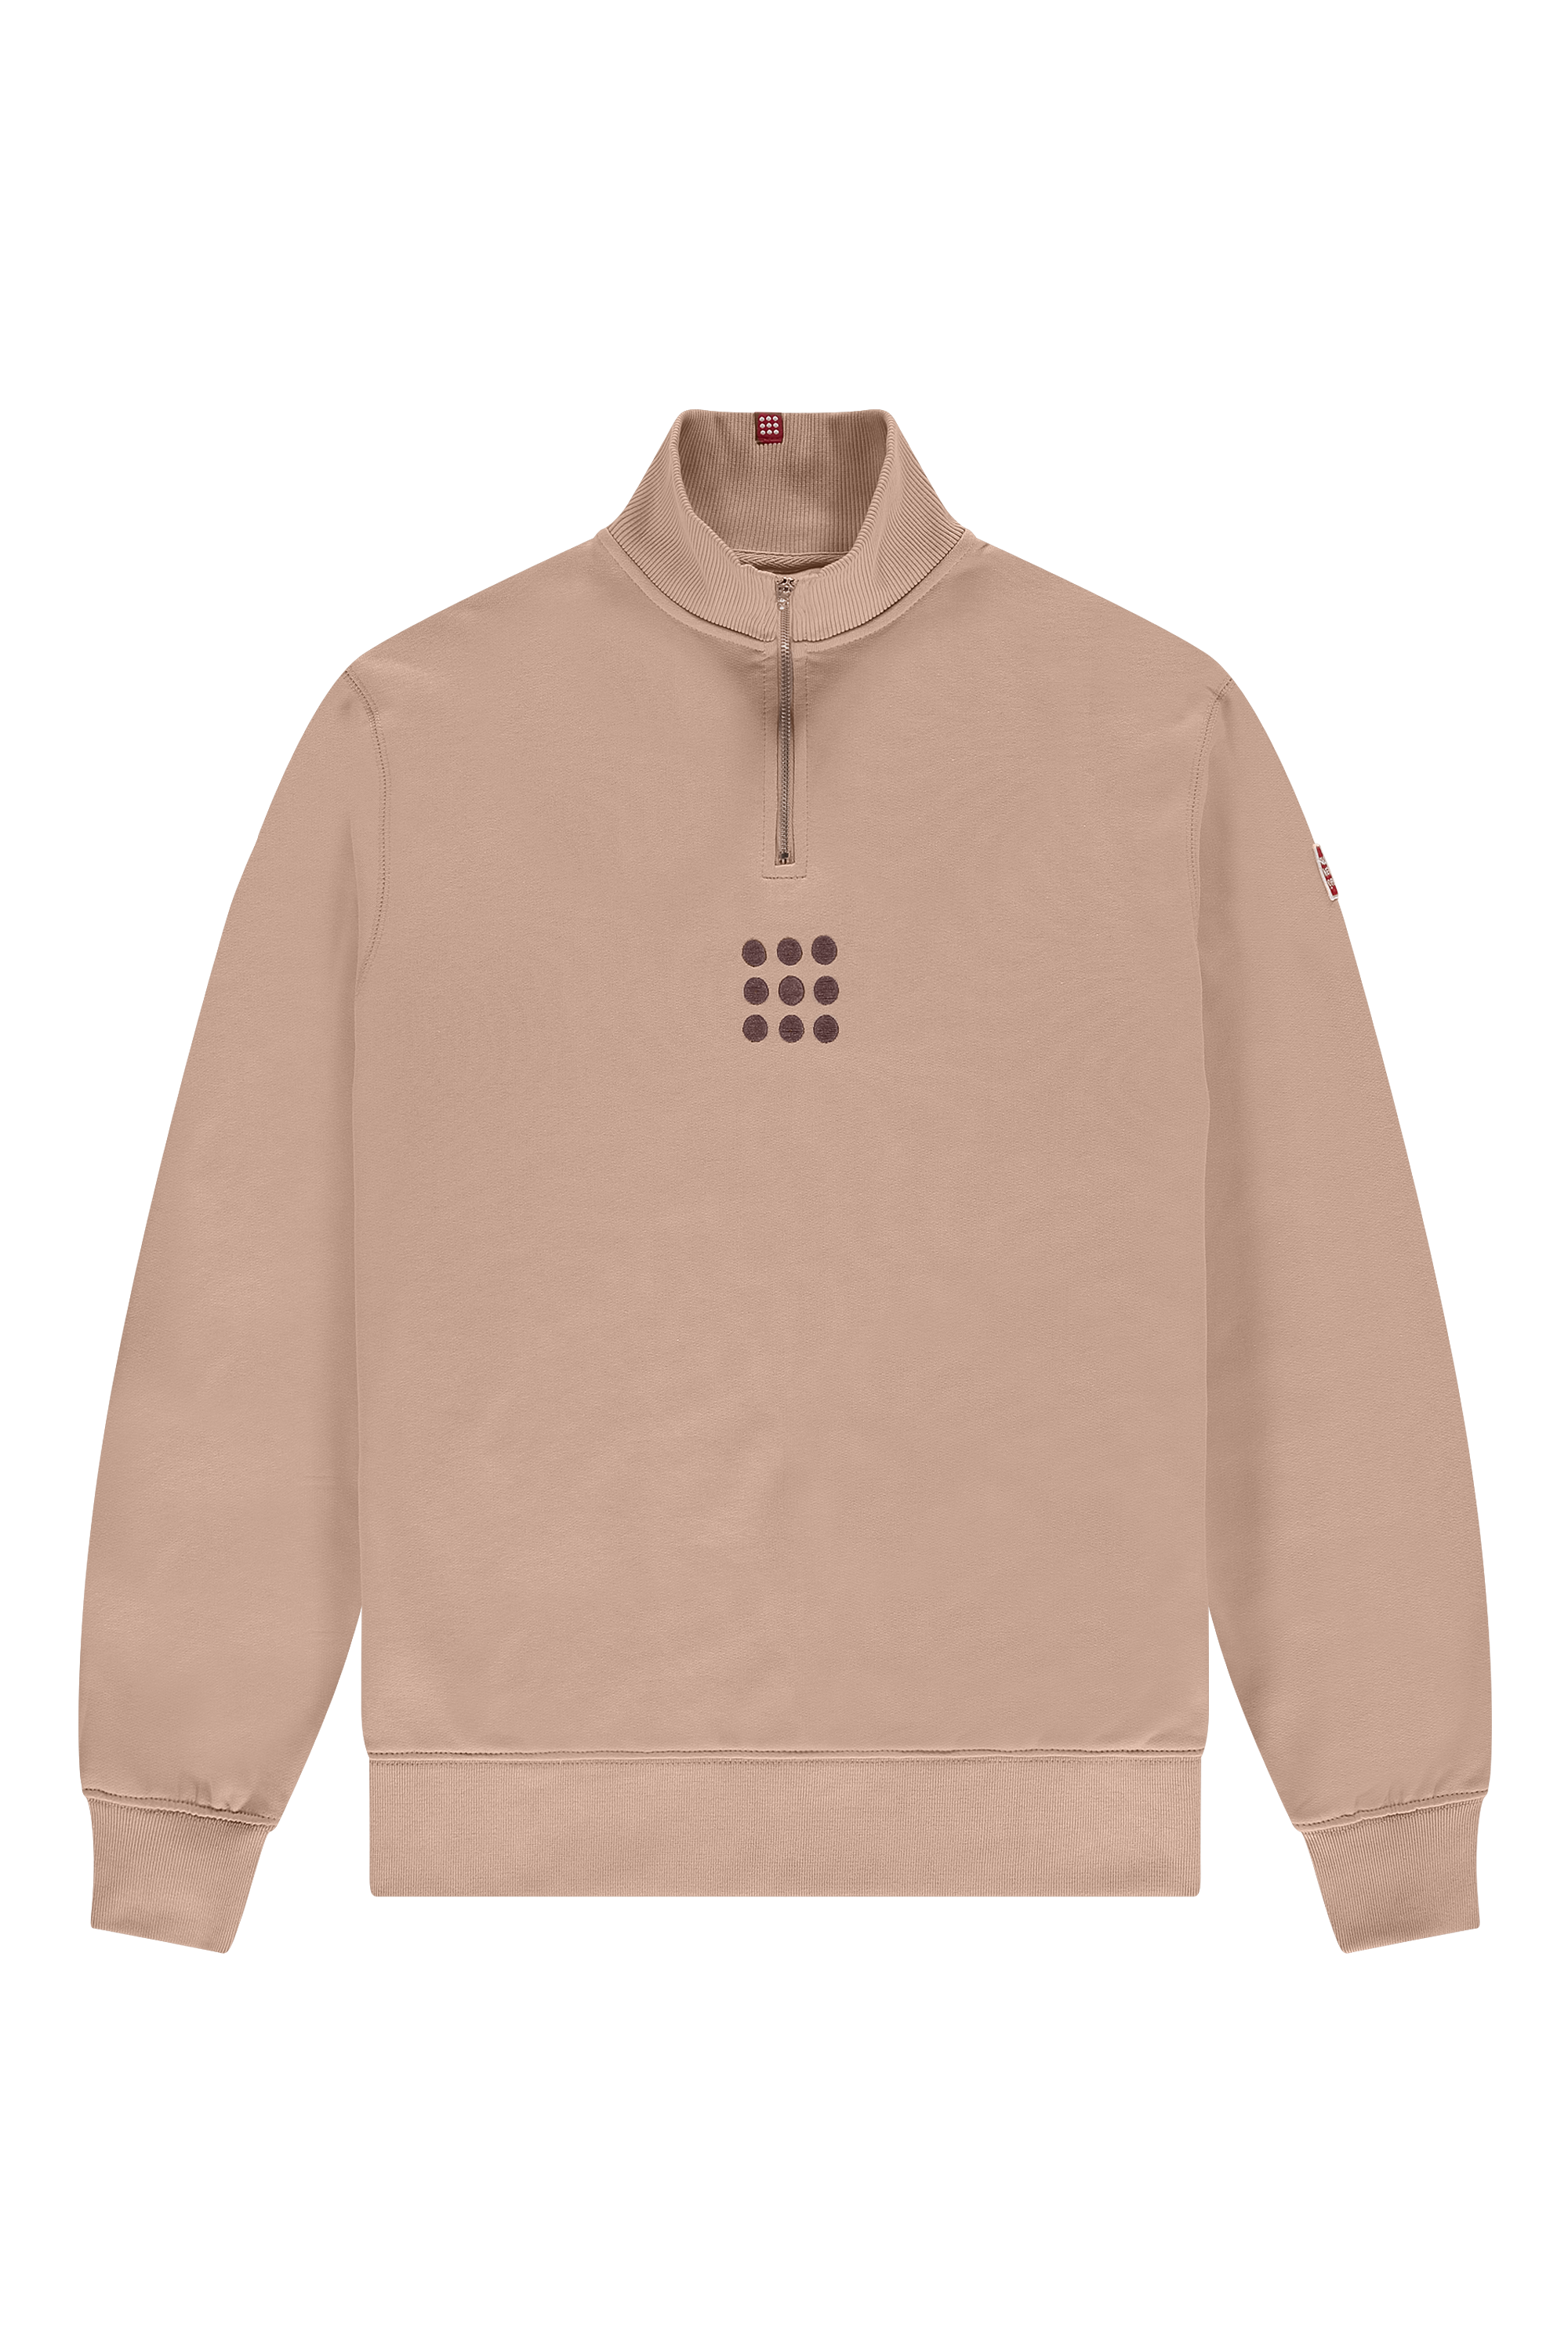 products-testudosweater_taupe_front-png